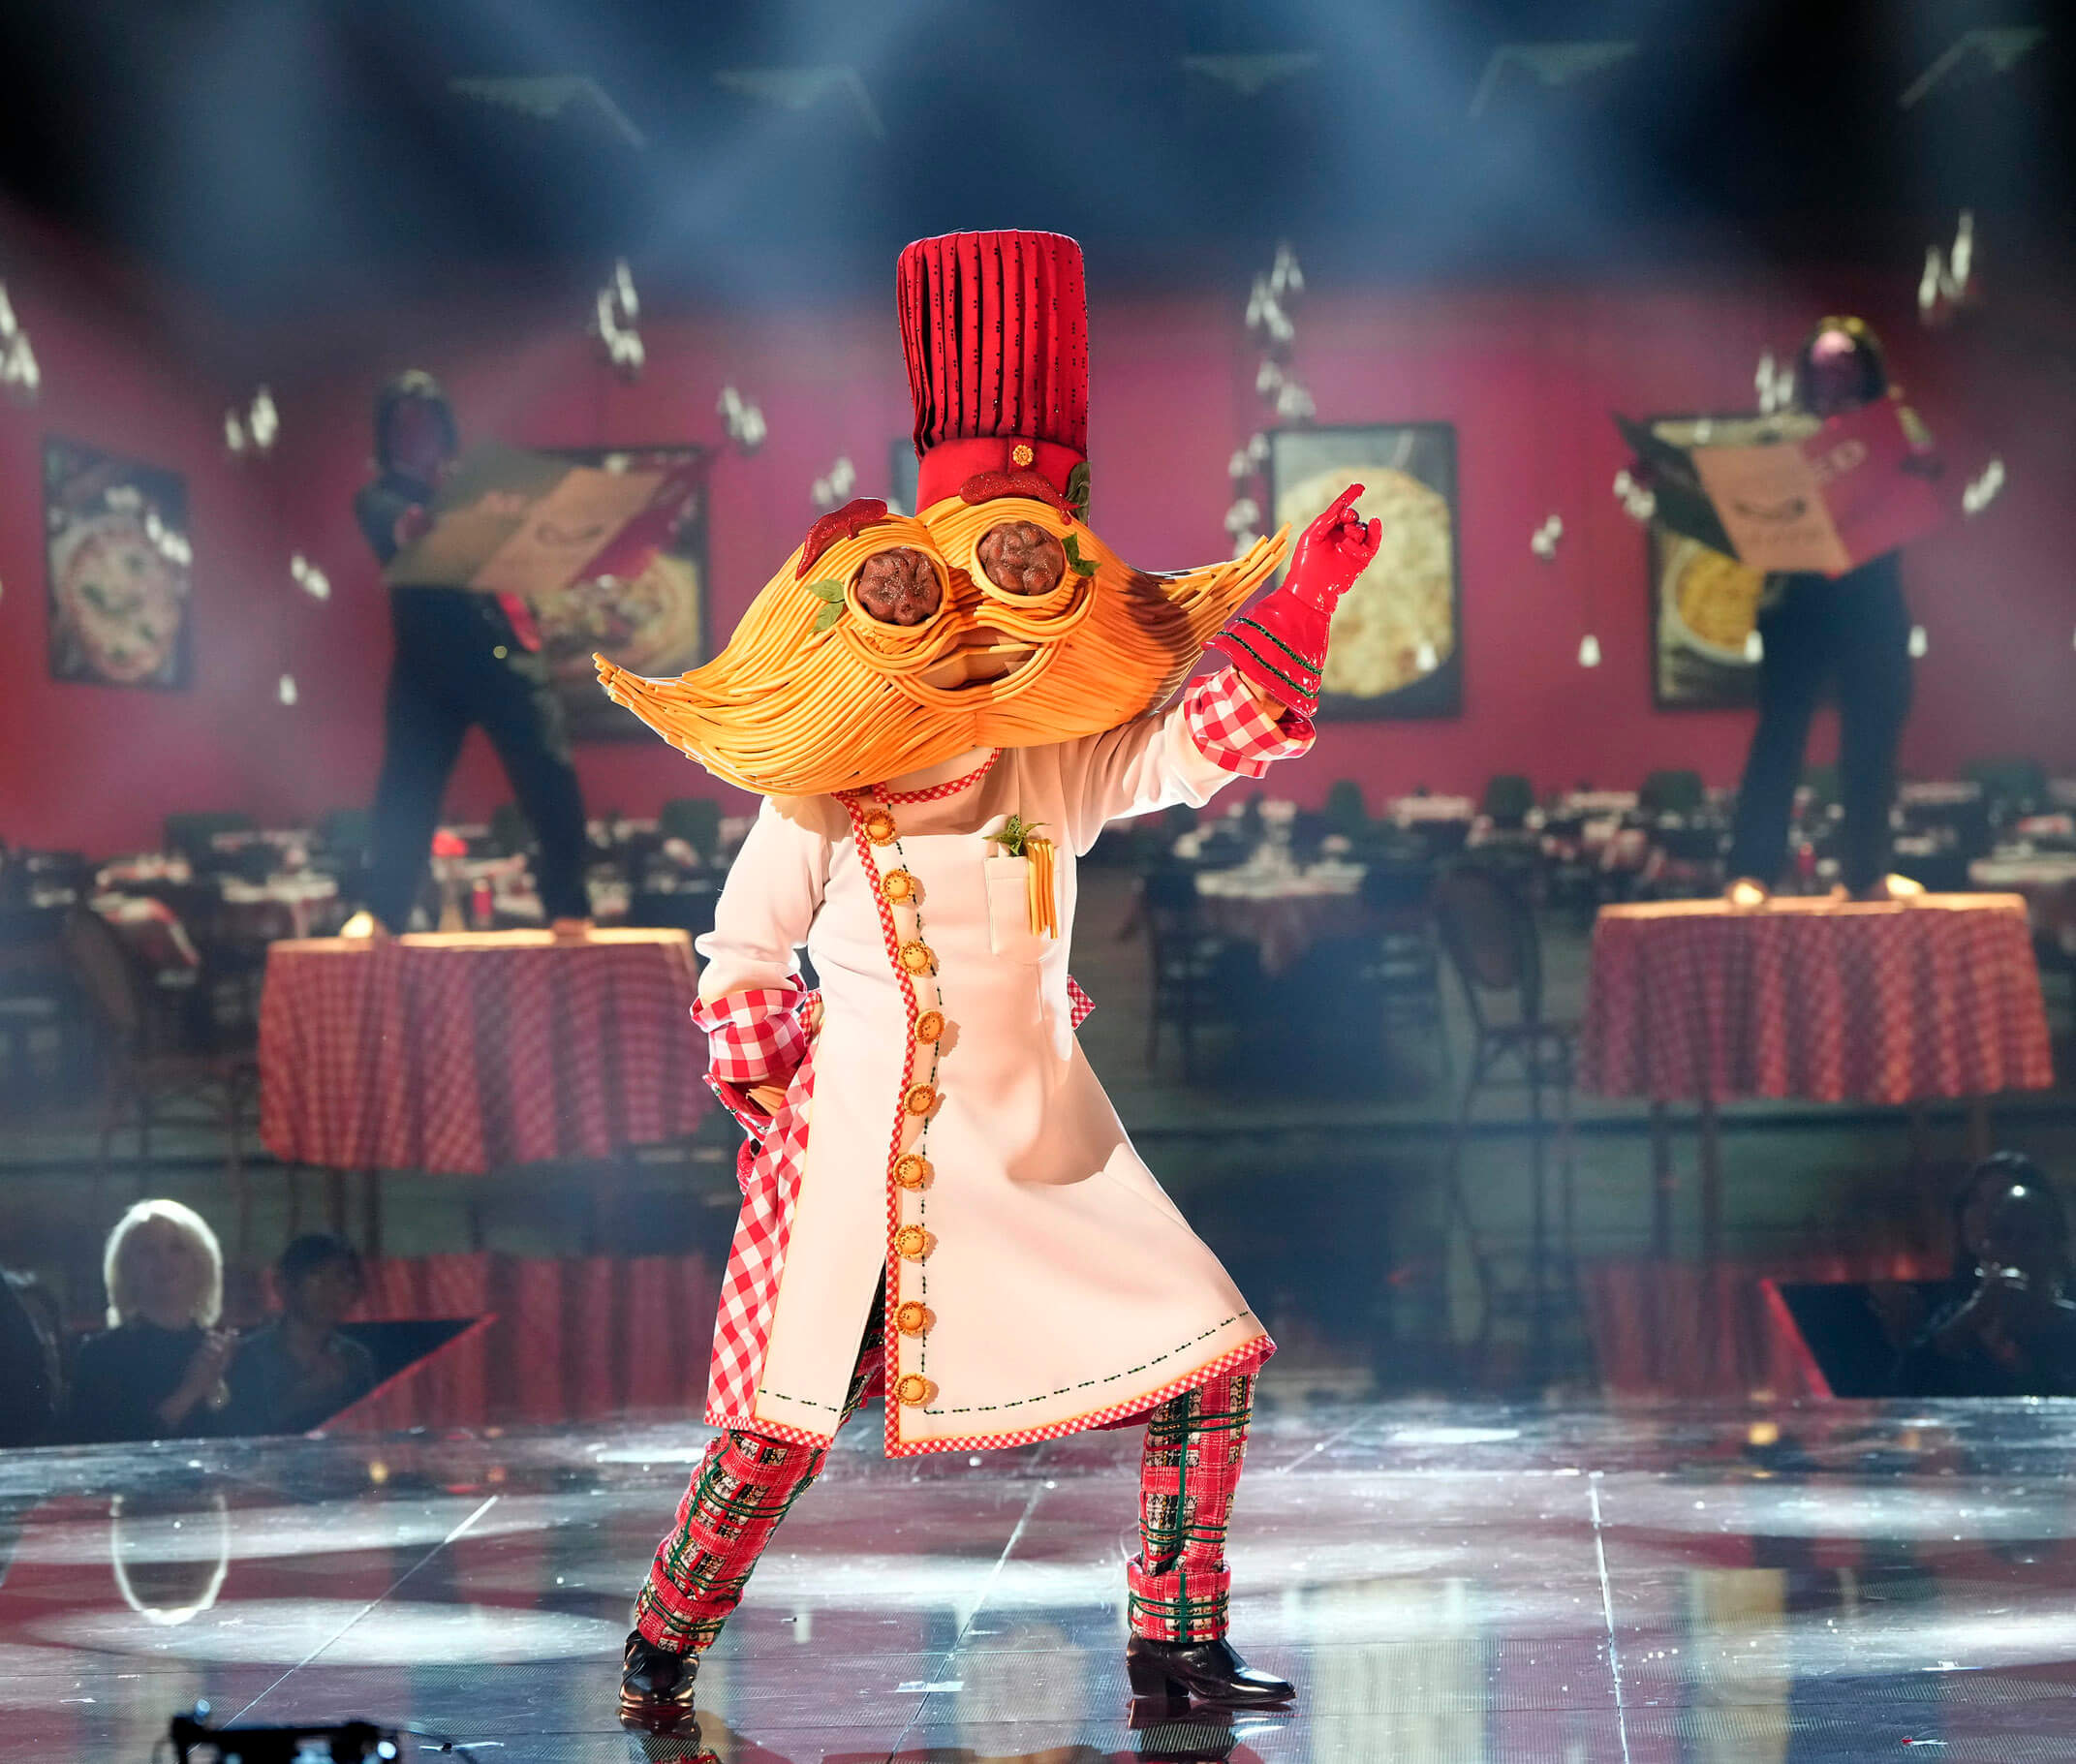 'The Masked Singer' Season 11 Group C singer Spaghetti and Meatballs on stage with Italian restaurant decor